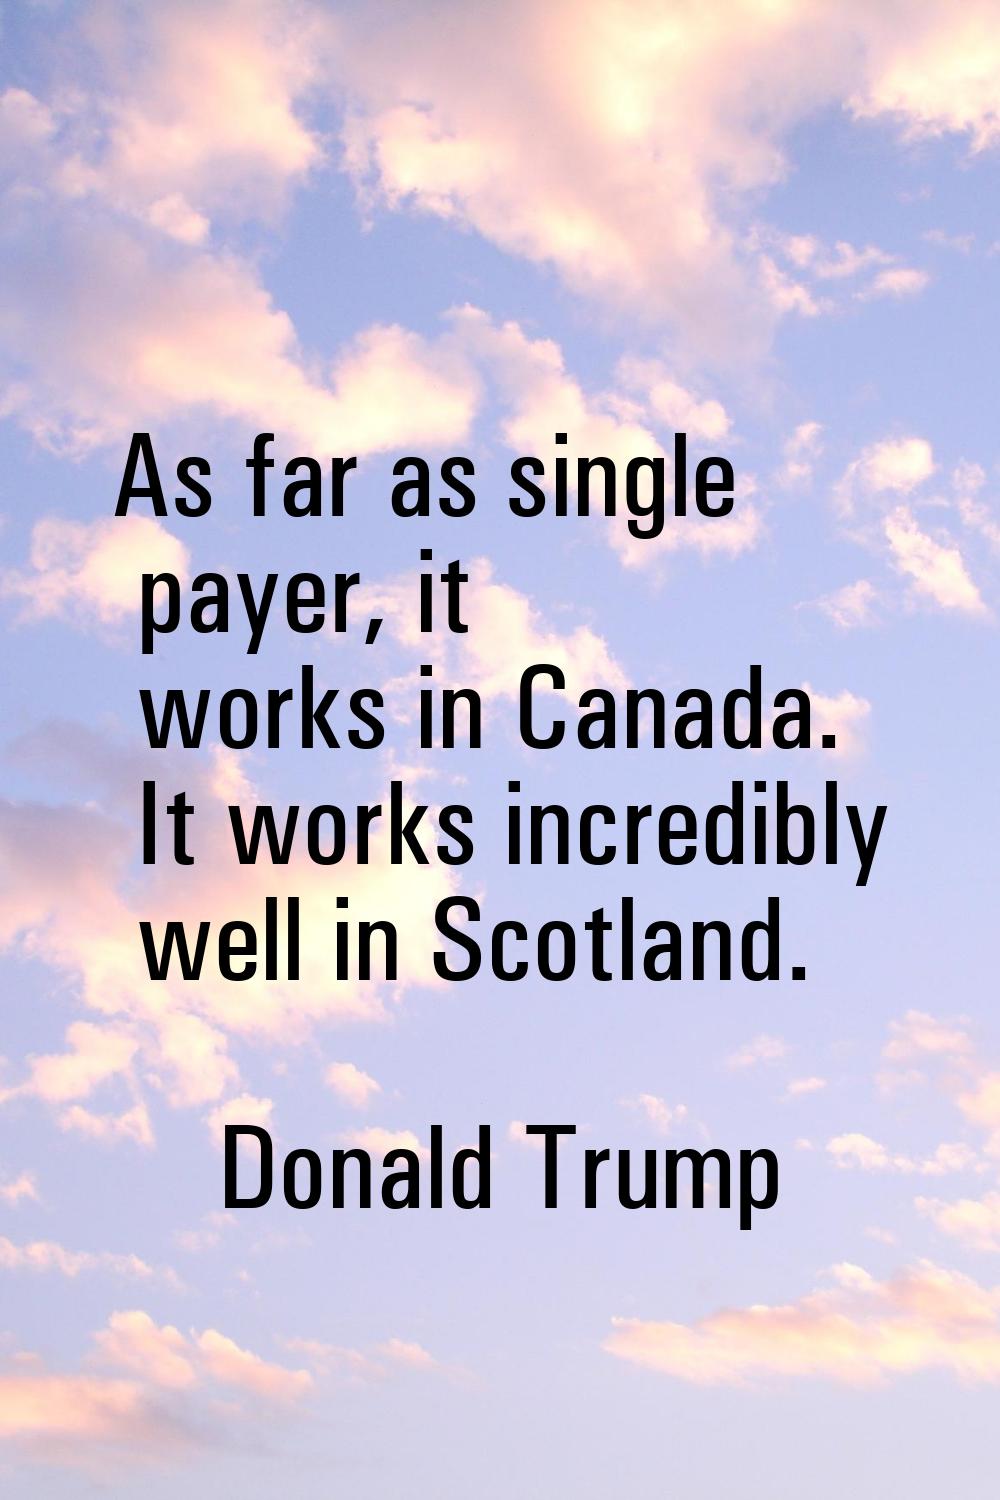 As far as single payer, it works in Canada. It works incredibly well in Scotland.